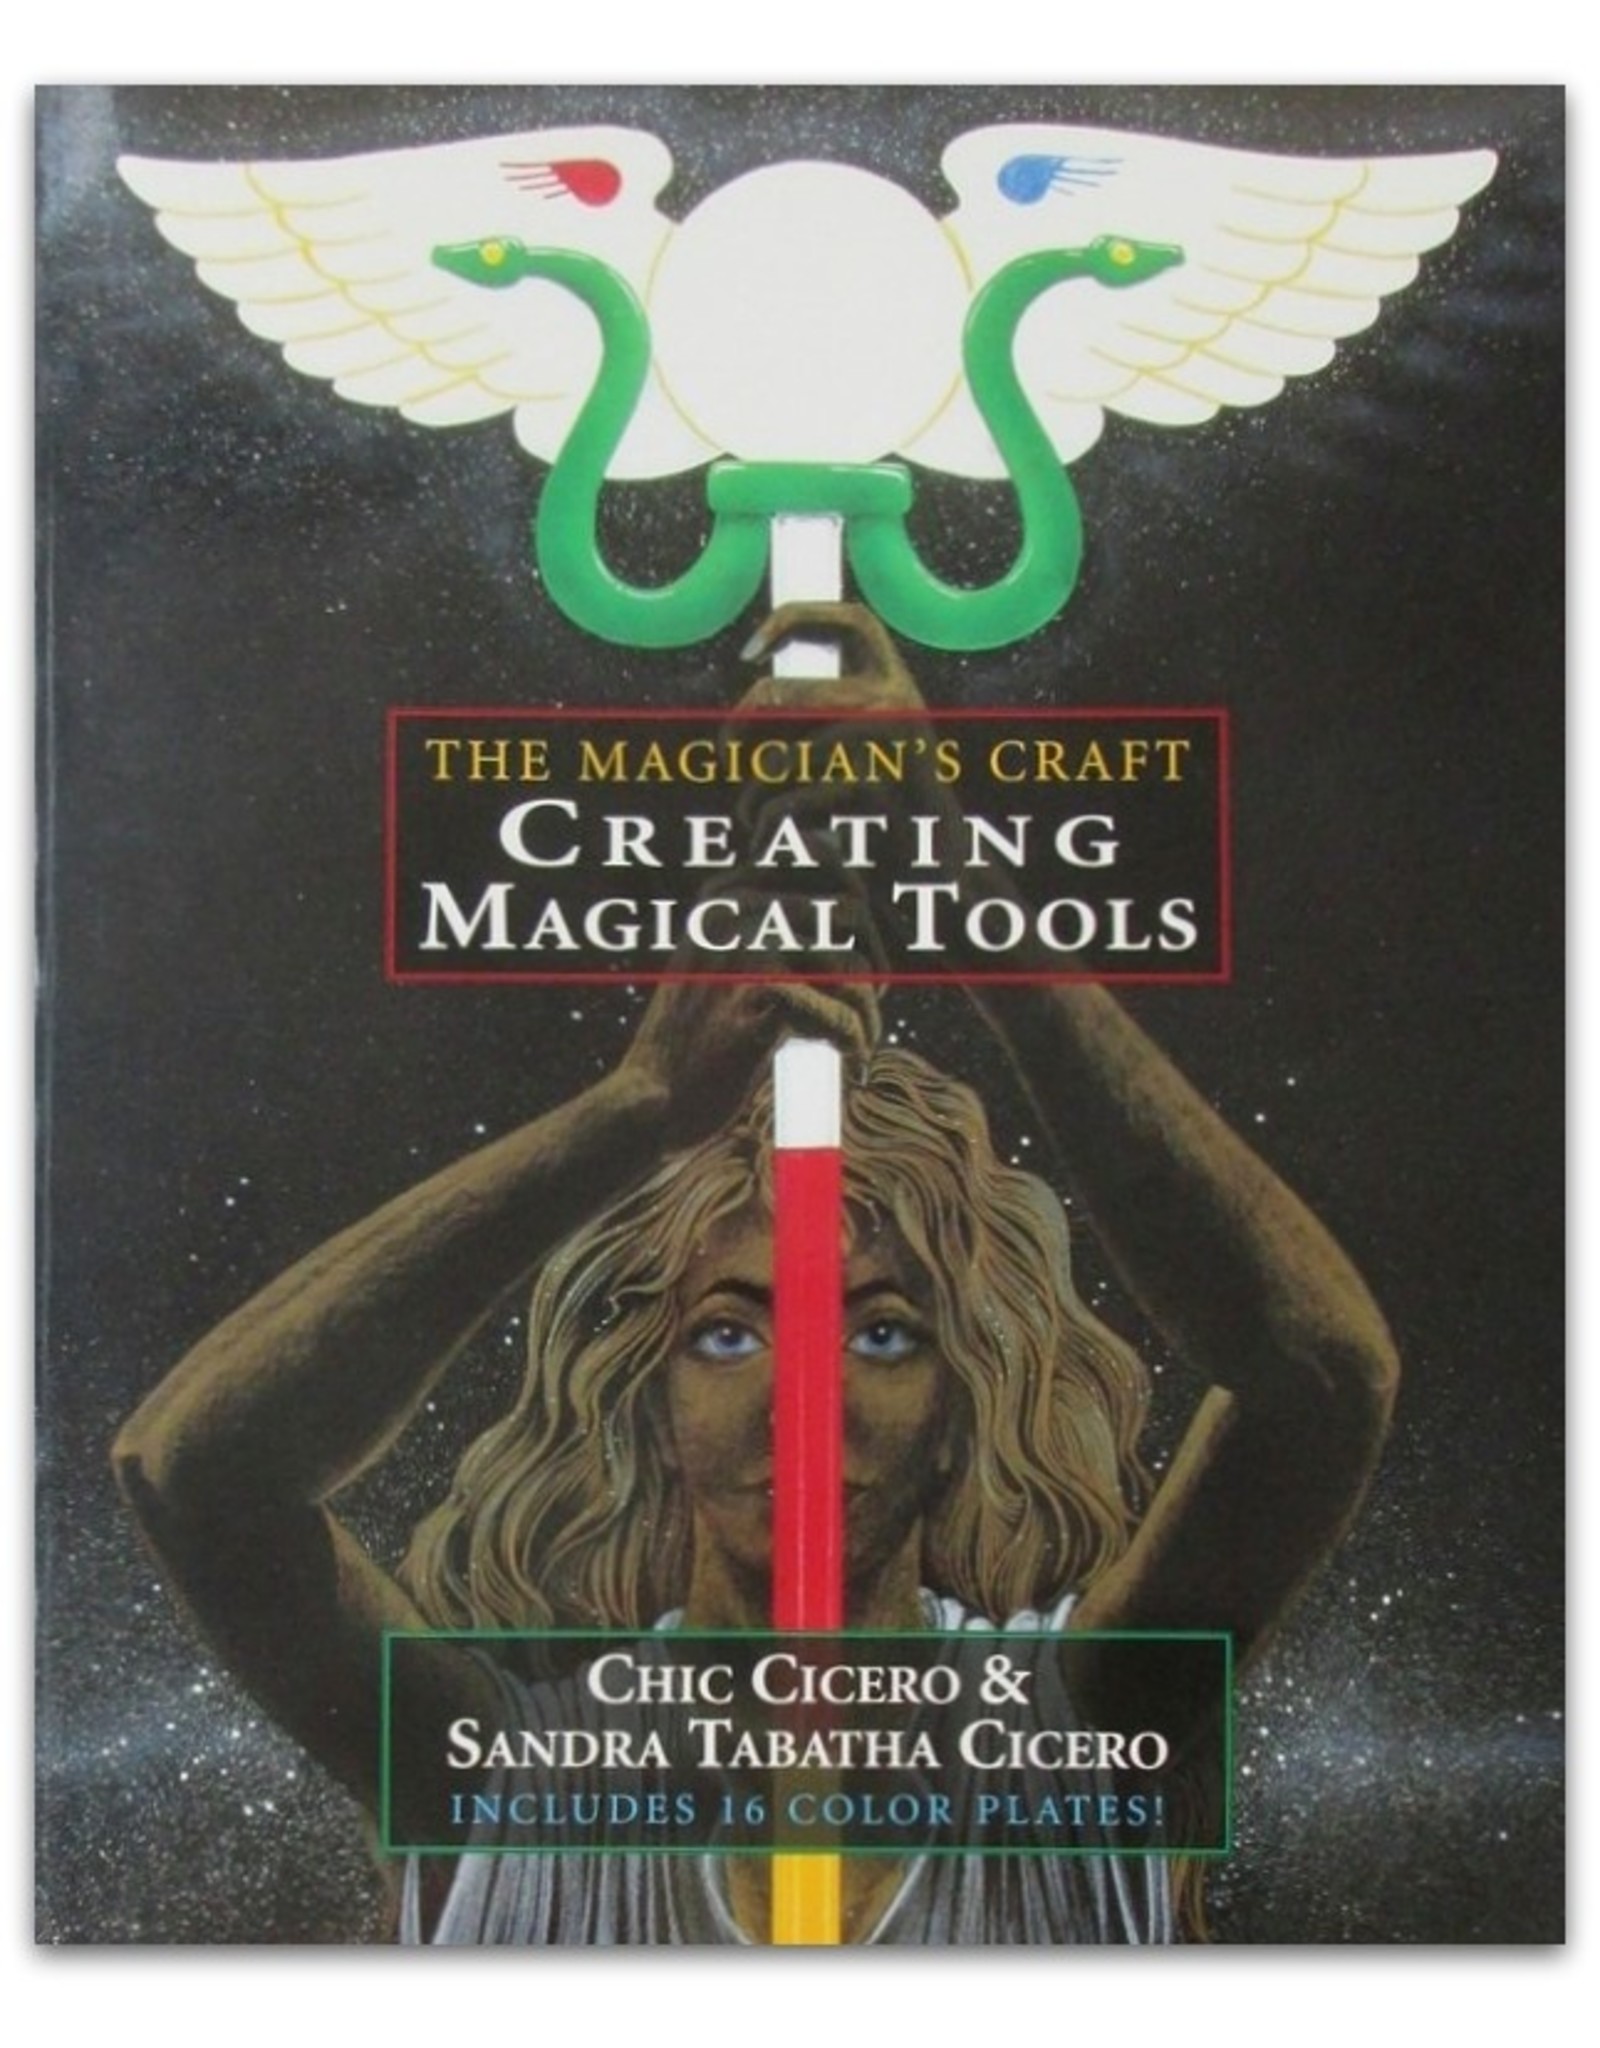 Chic & Sandra Cicero The Magician's Craft Creating Magical Tools 